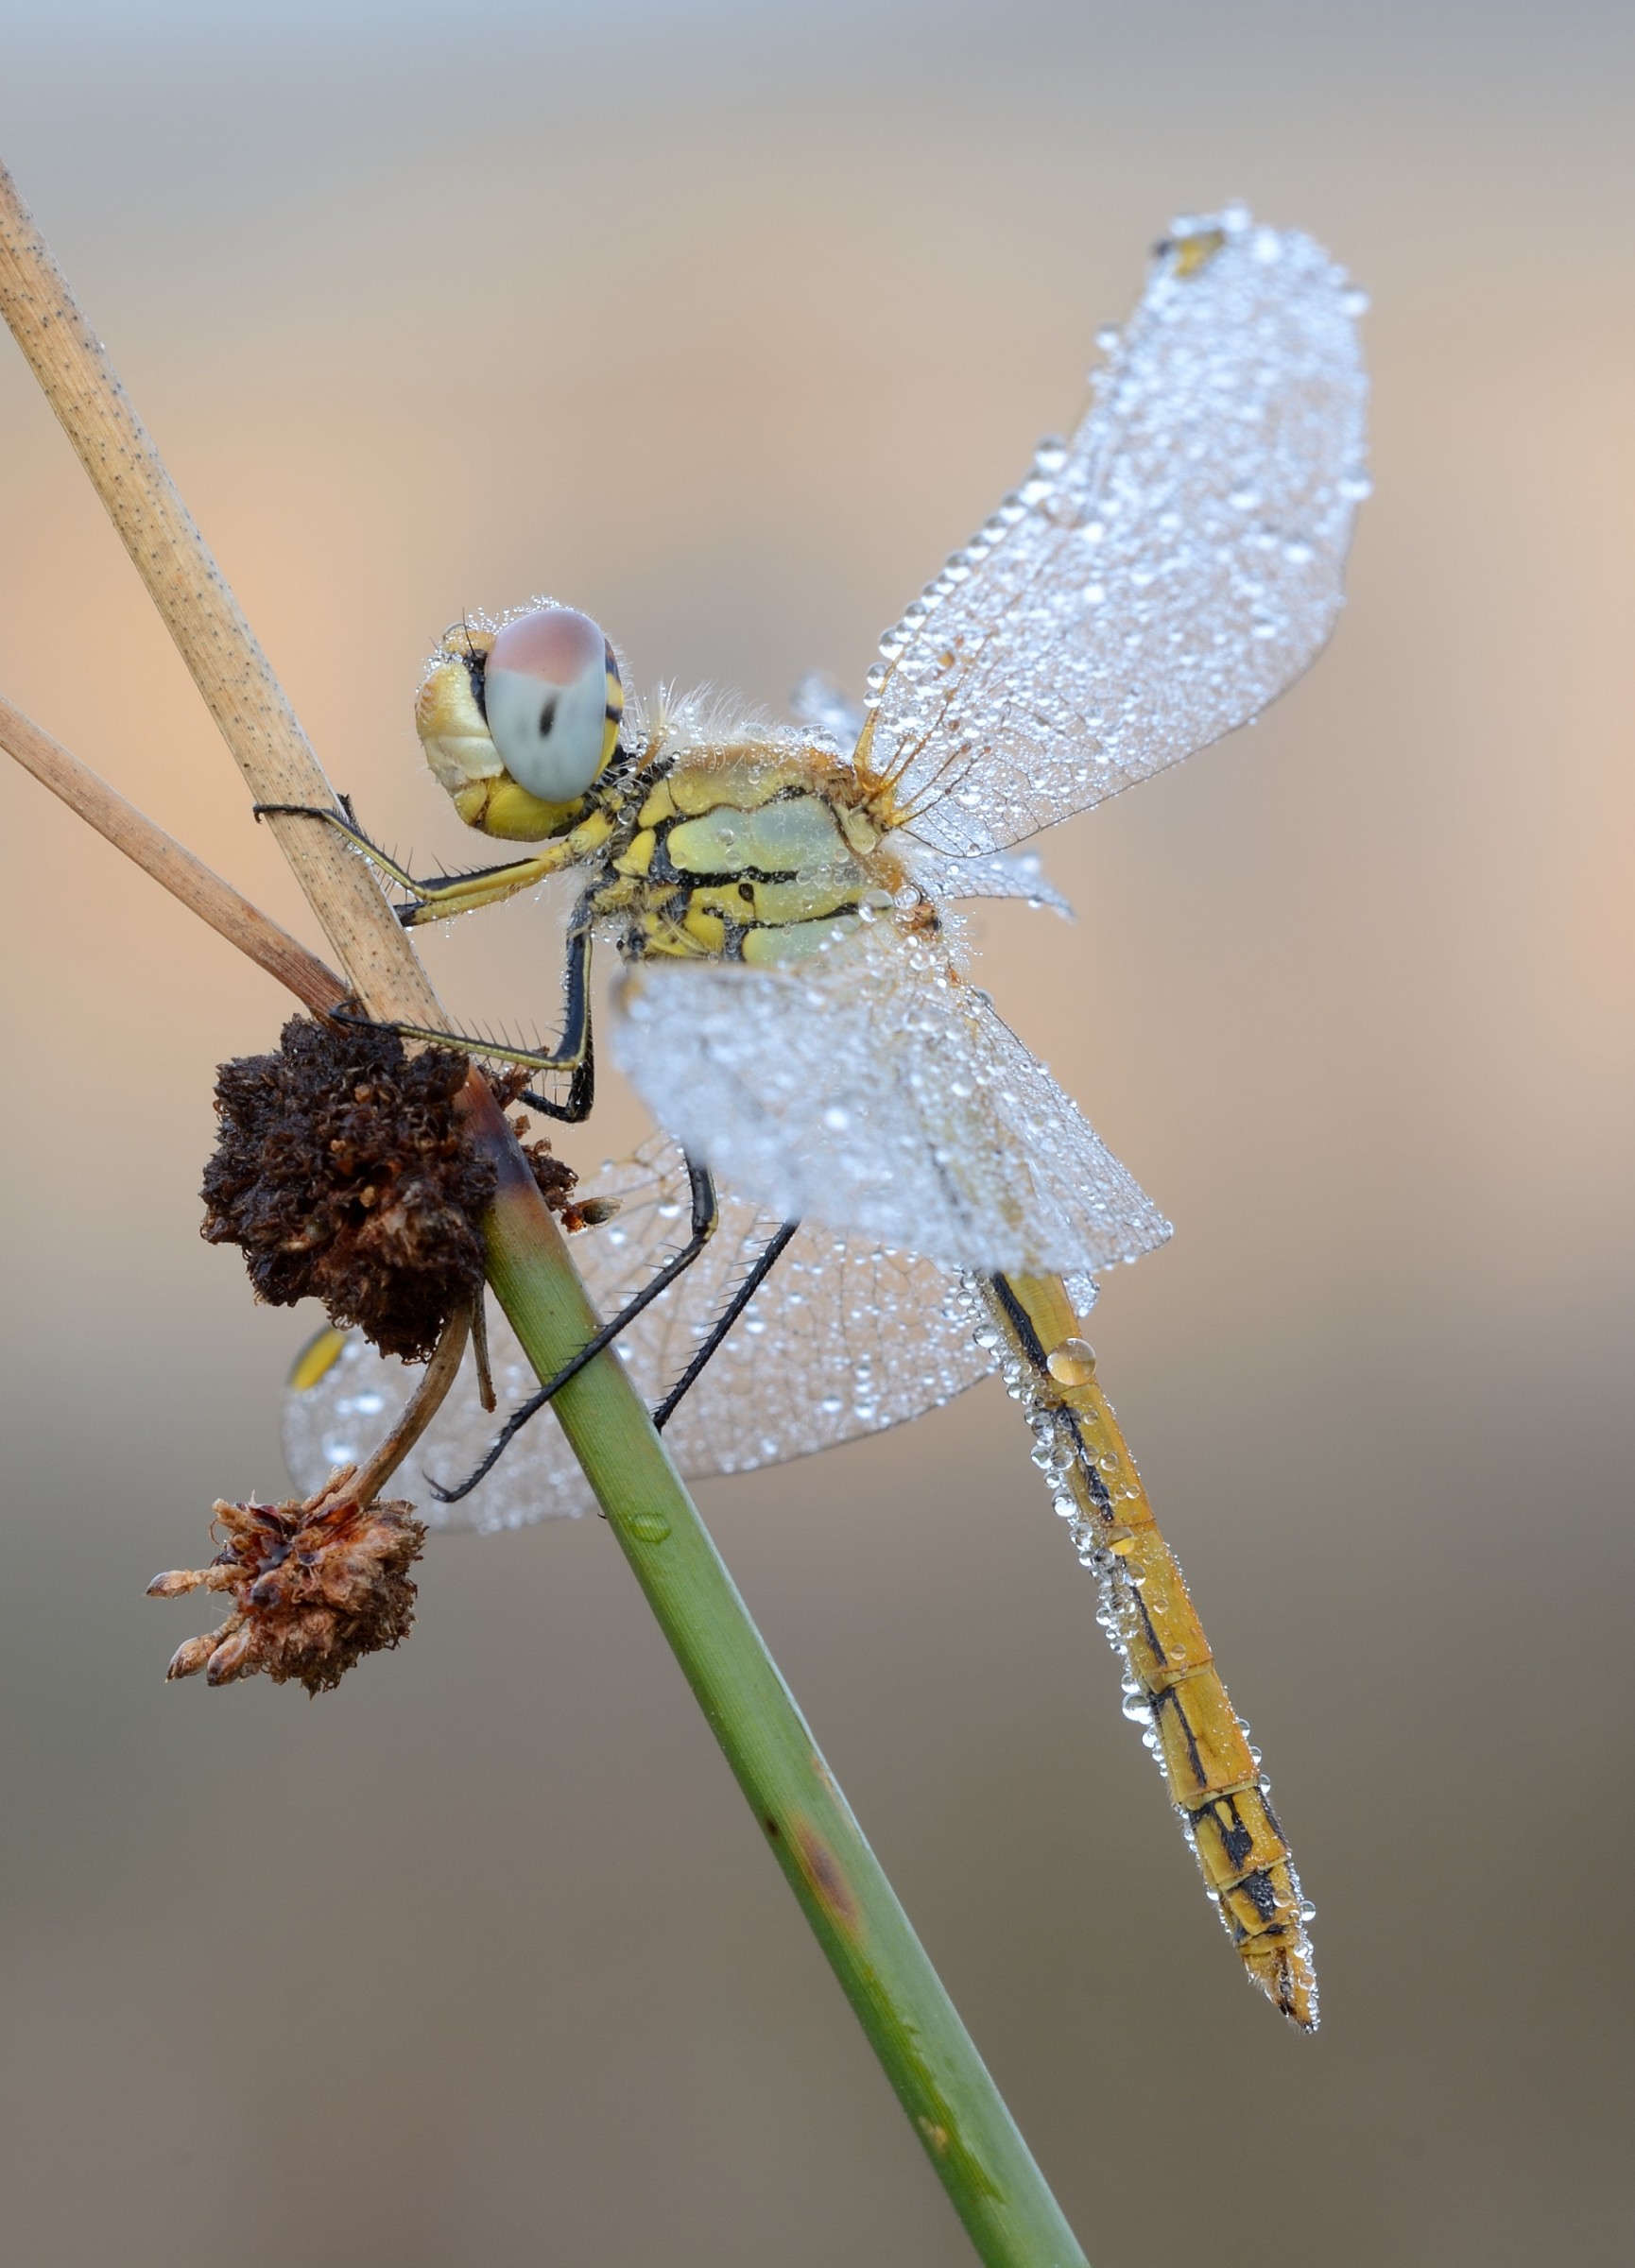 Dragonfly (Sympetrum fonscolombii)...